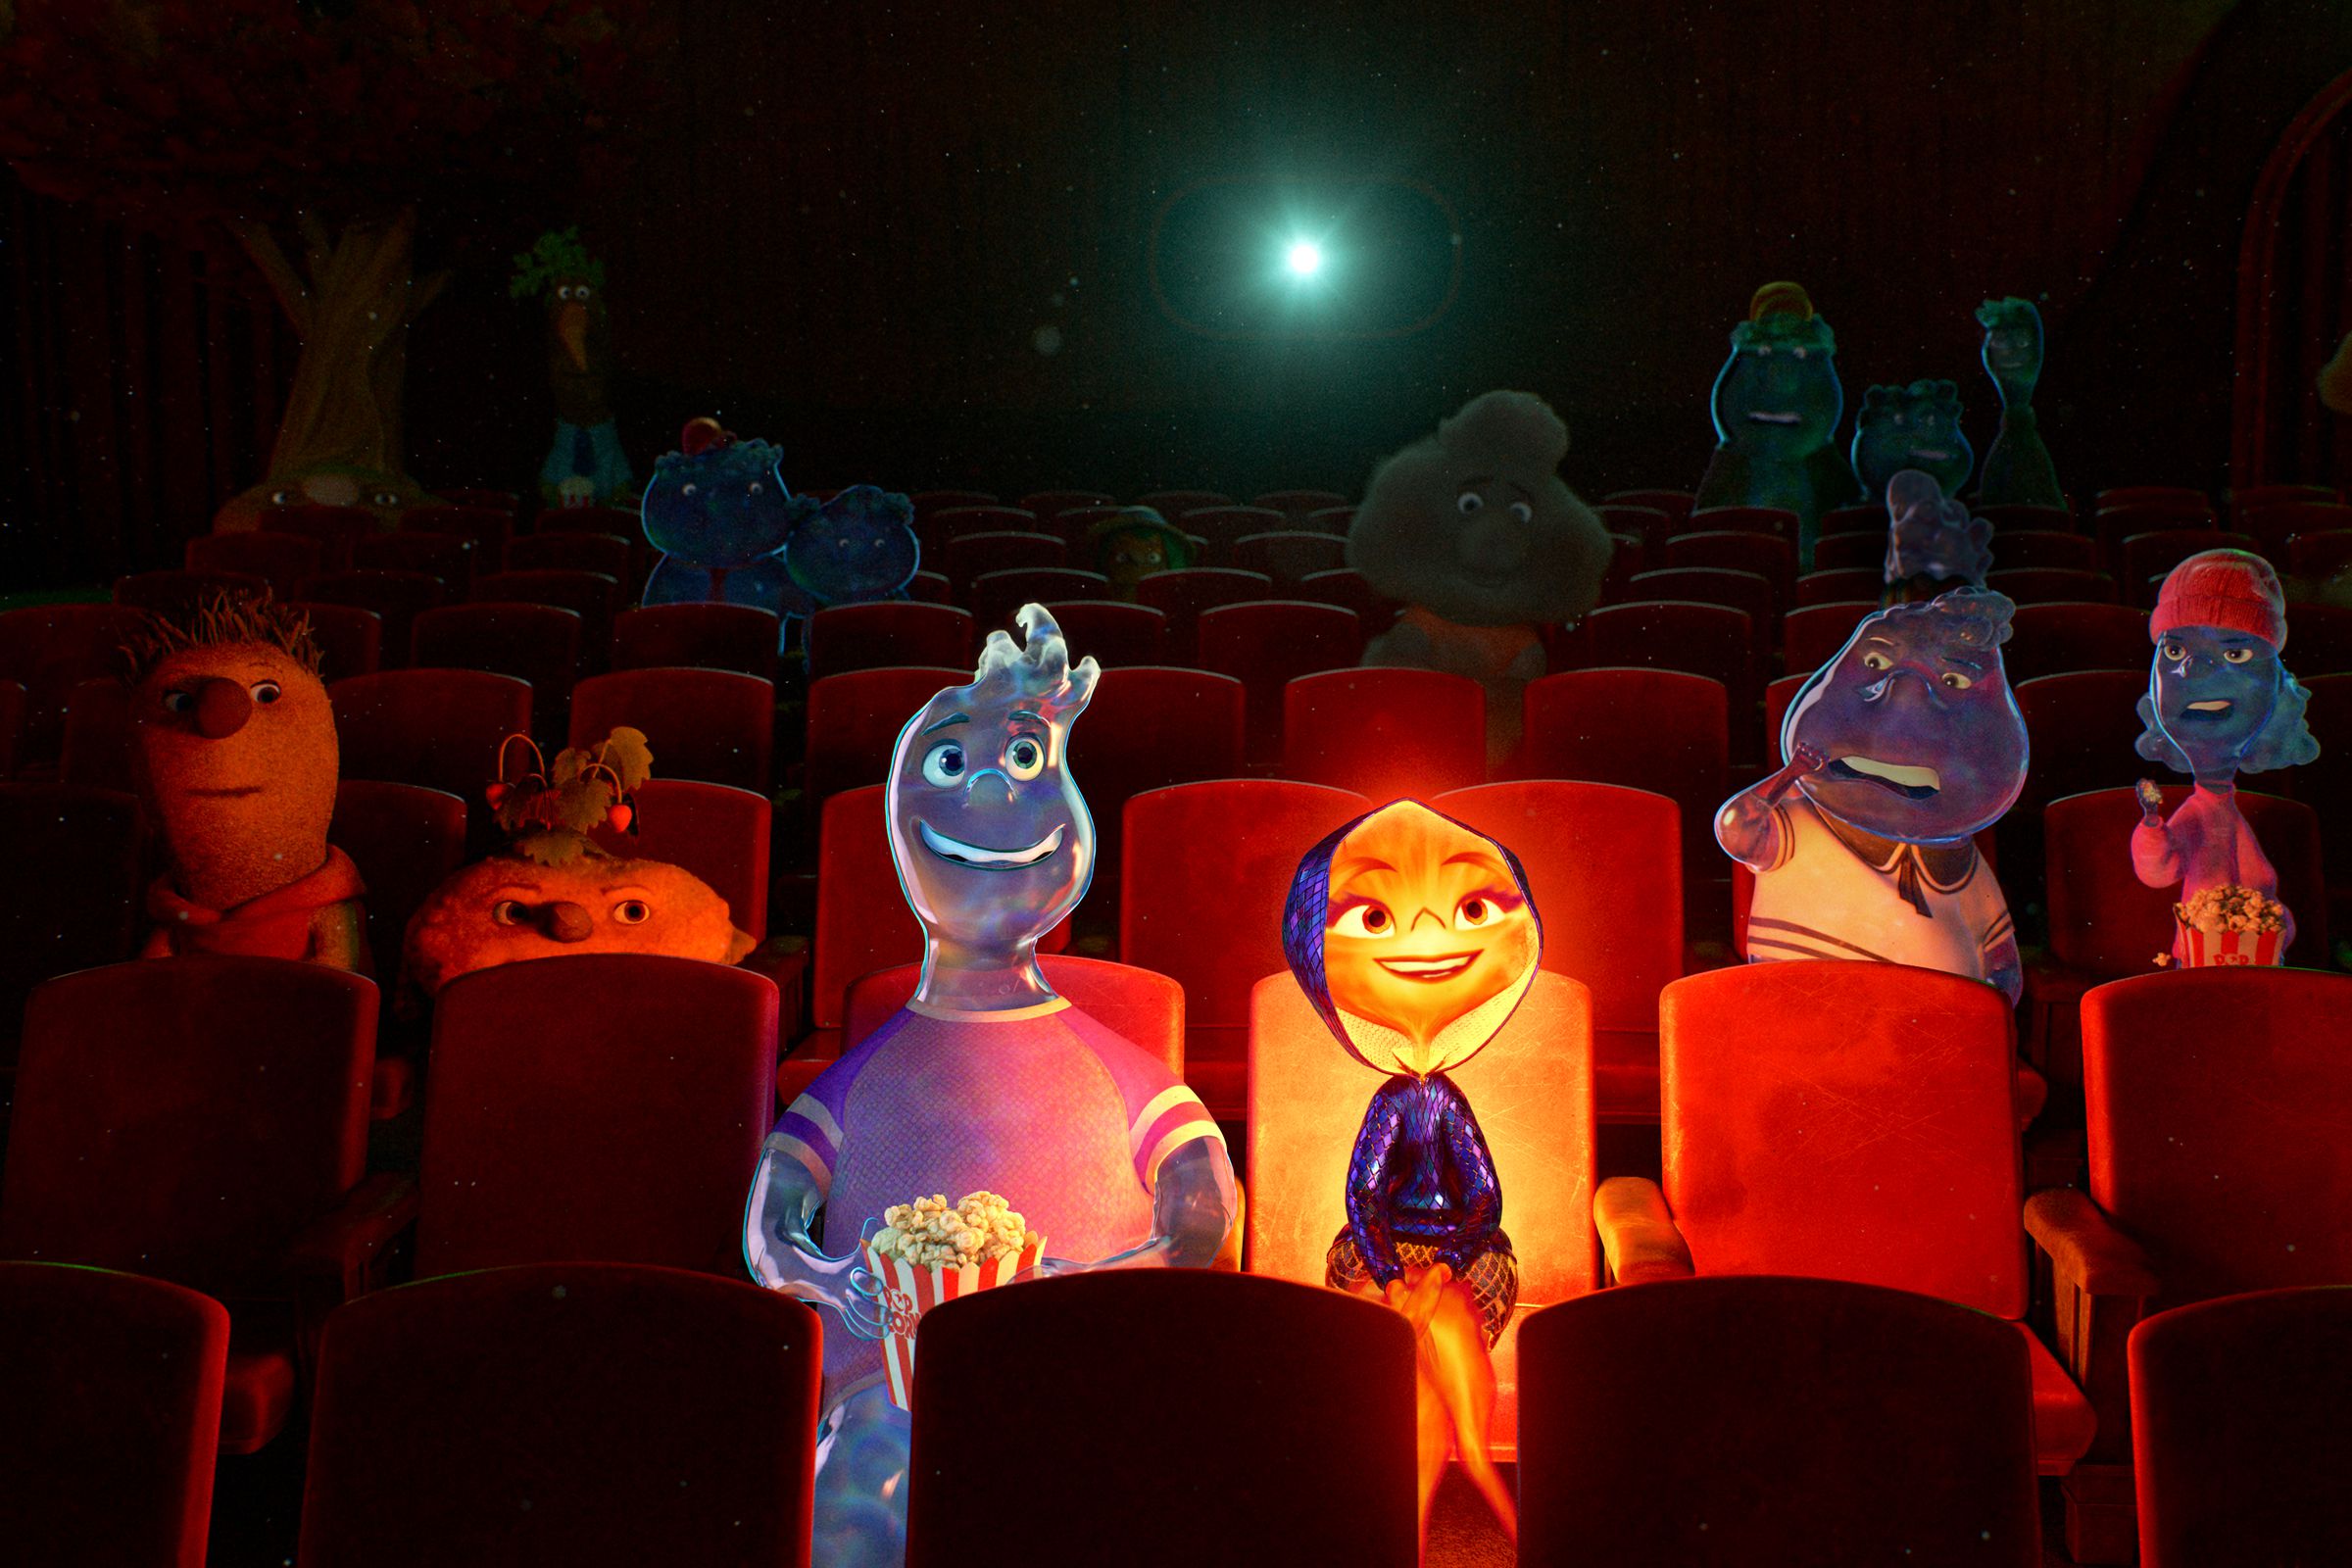 A humanoid man made entirely of water sitting next to a humanoid woman made of flames. The pair are seated next to one another in a dark movie theater illuminated only by the light shining from a projector in the distant background and from the light emanating from the woman’s body.